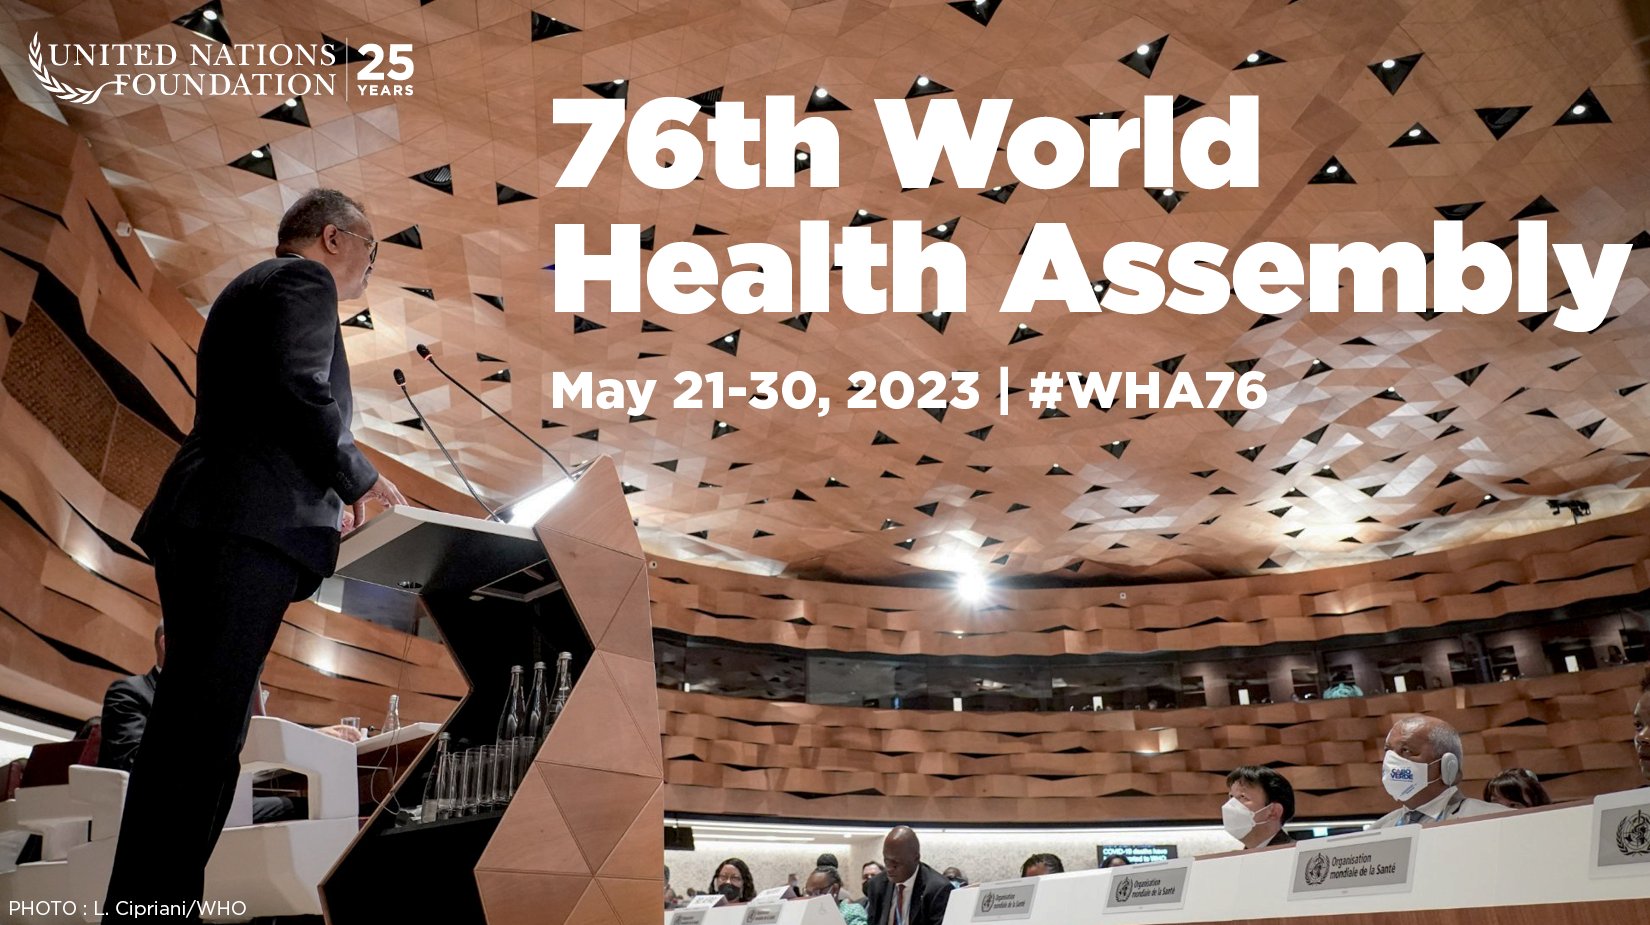 United Nations Foundation on X: The 76th World Health Assembly starts May  21. Bookmark this page for event info, insights, and more. ↓   #WHA76 #WHA  / X